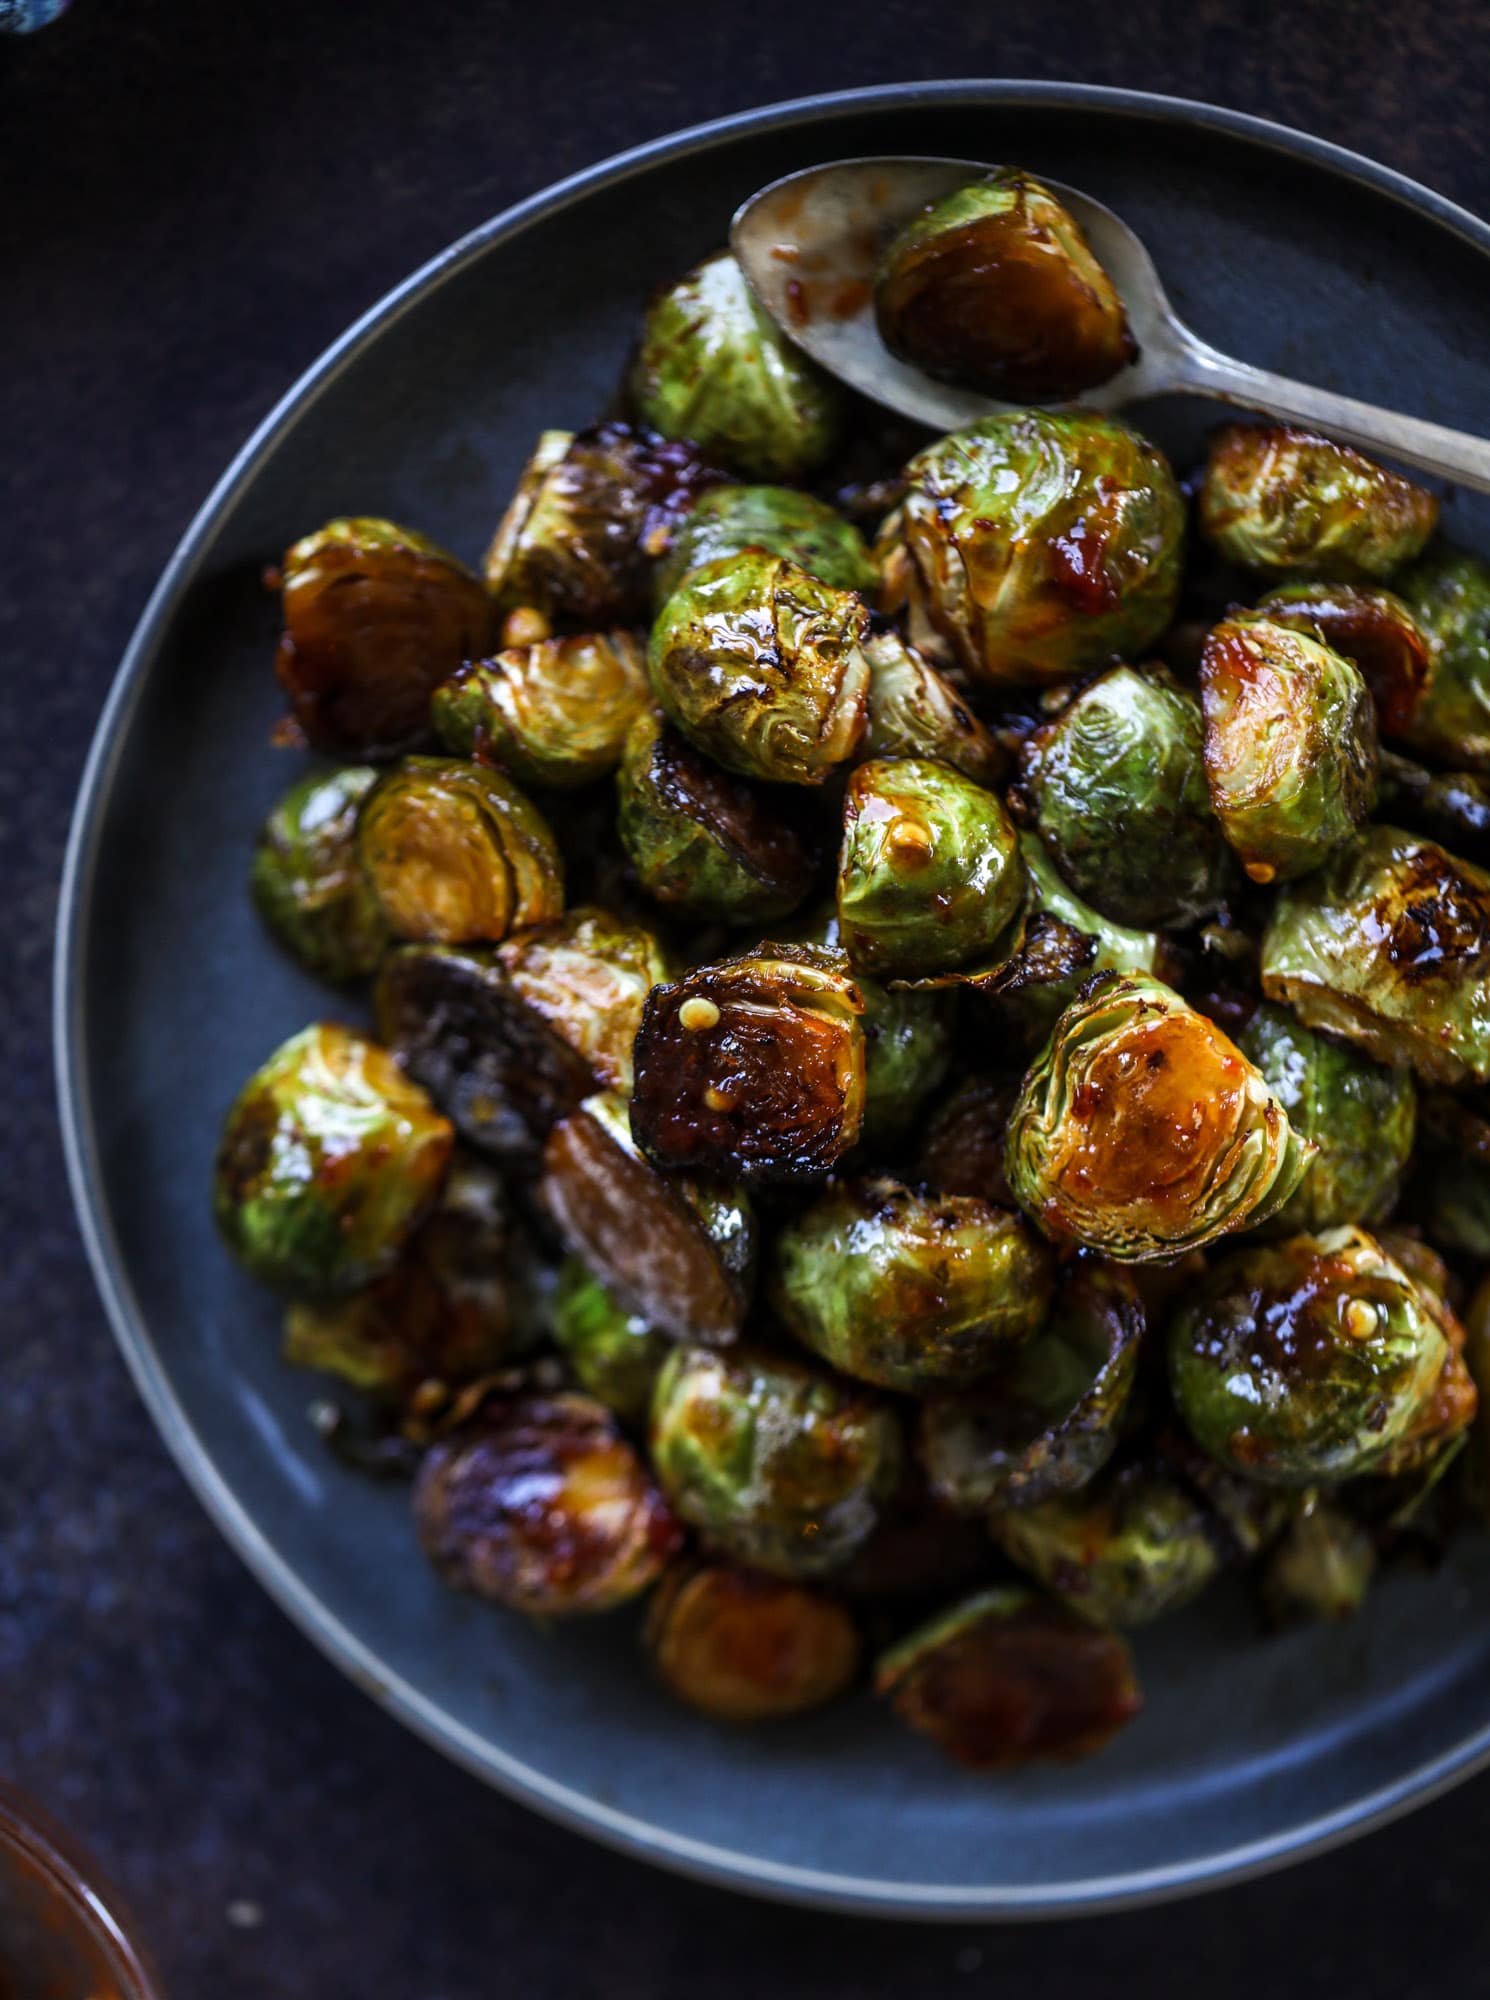 These sweet and spicy brussels sprouts are roasted to perfect and the most delicious side dish! It's a great way to elevate regular old brussels sprouts and make a fantastic side to to serve on a weeknight! I howsweeteats.com #spicy #brusselssprouts